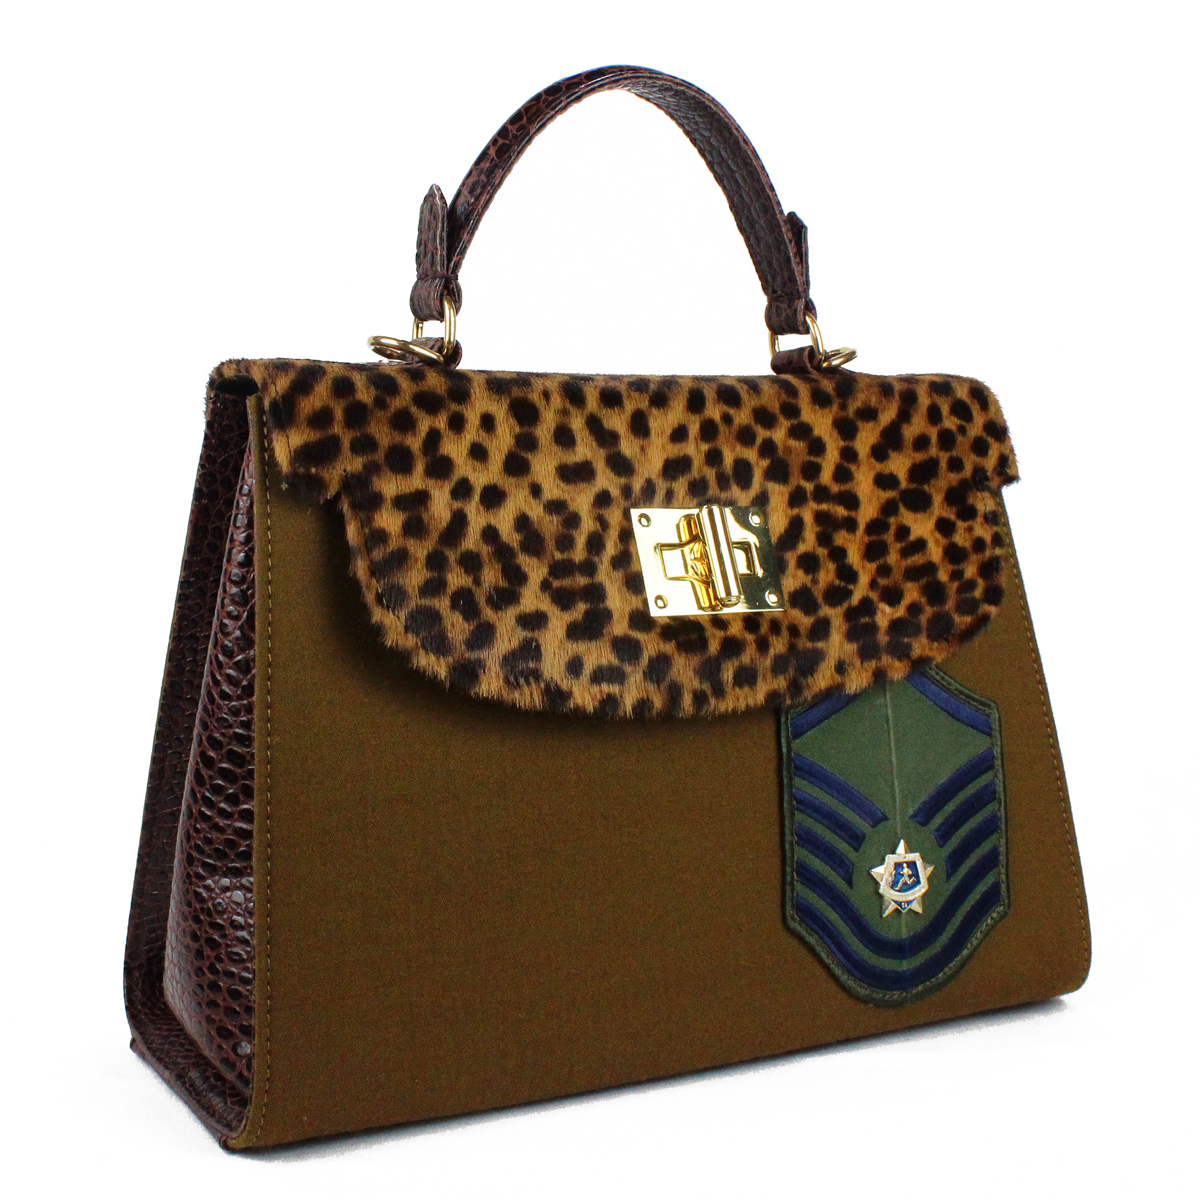 Cathrine Military #1 Military bag | Handmade bags by craftsmen